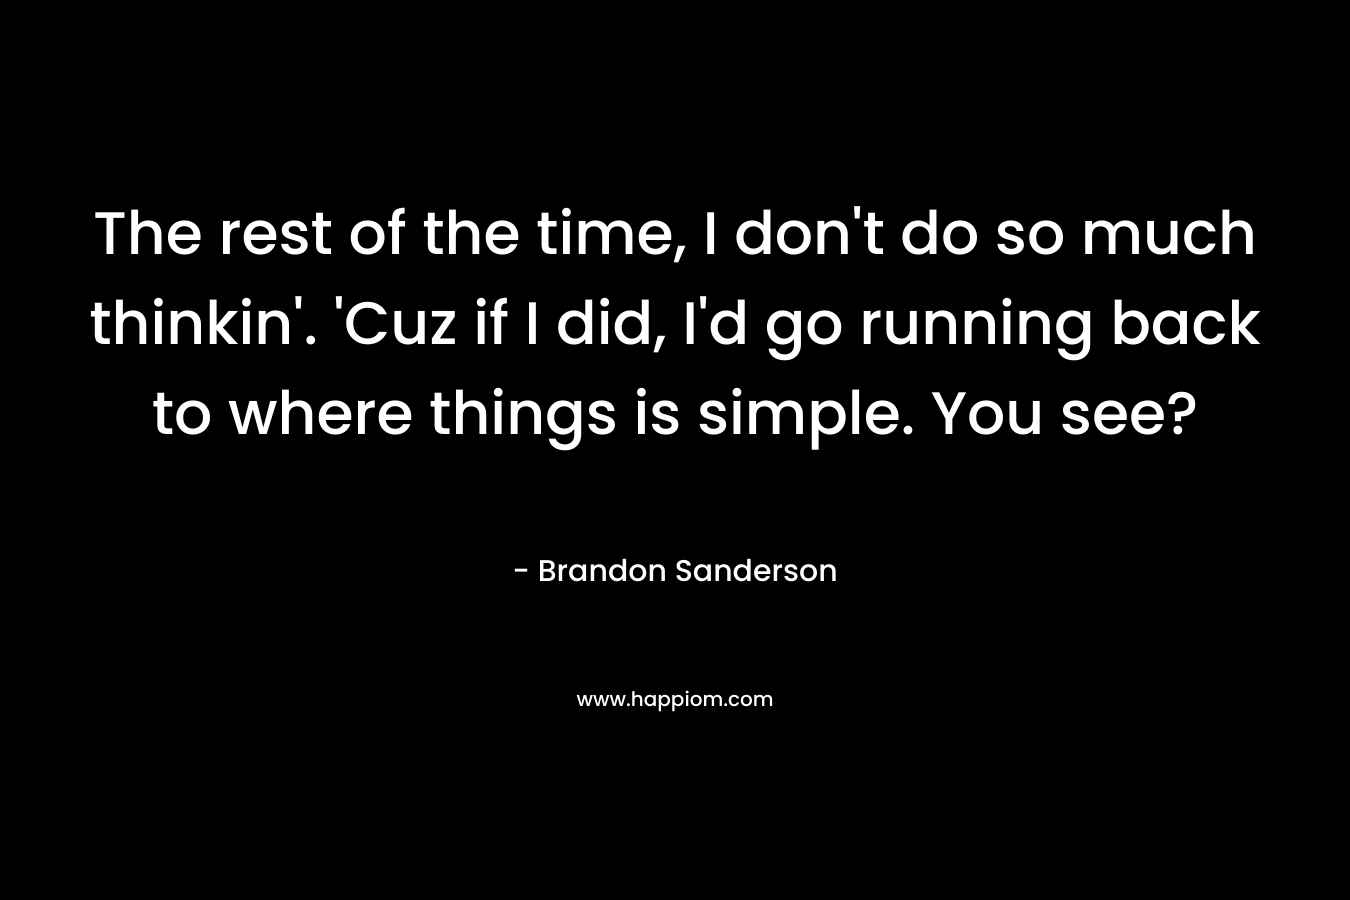 The rest of the time, I don’t do so much thinkin’. ‘Cuz if I did, I’d go running back to where things is simple. You see? – Brandon Sanderson